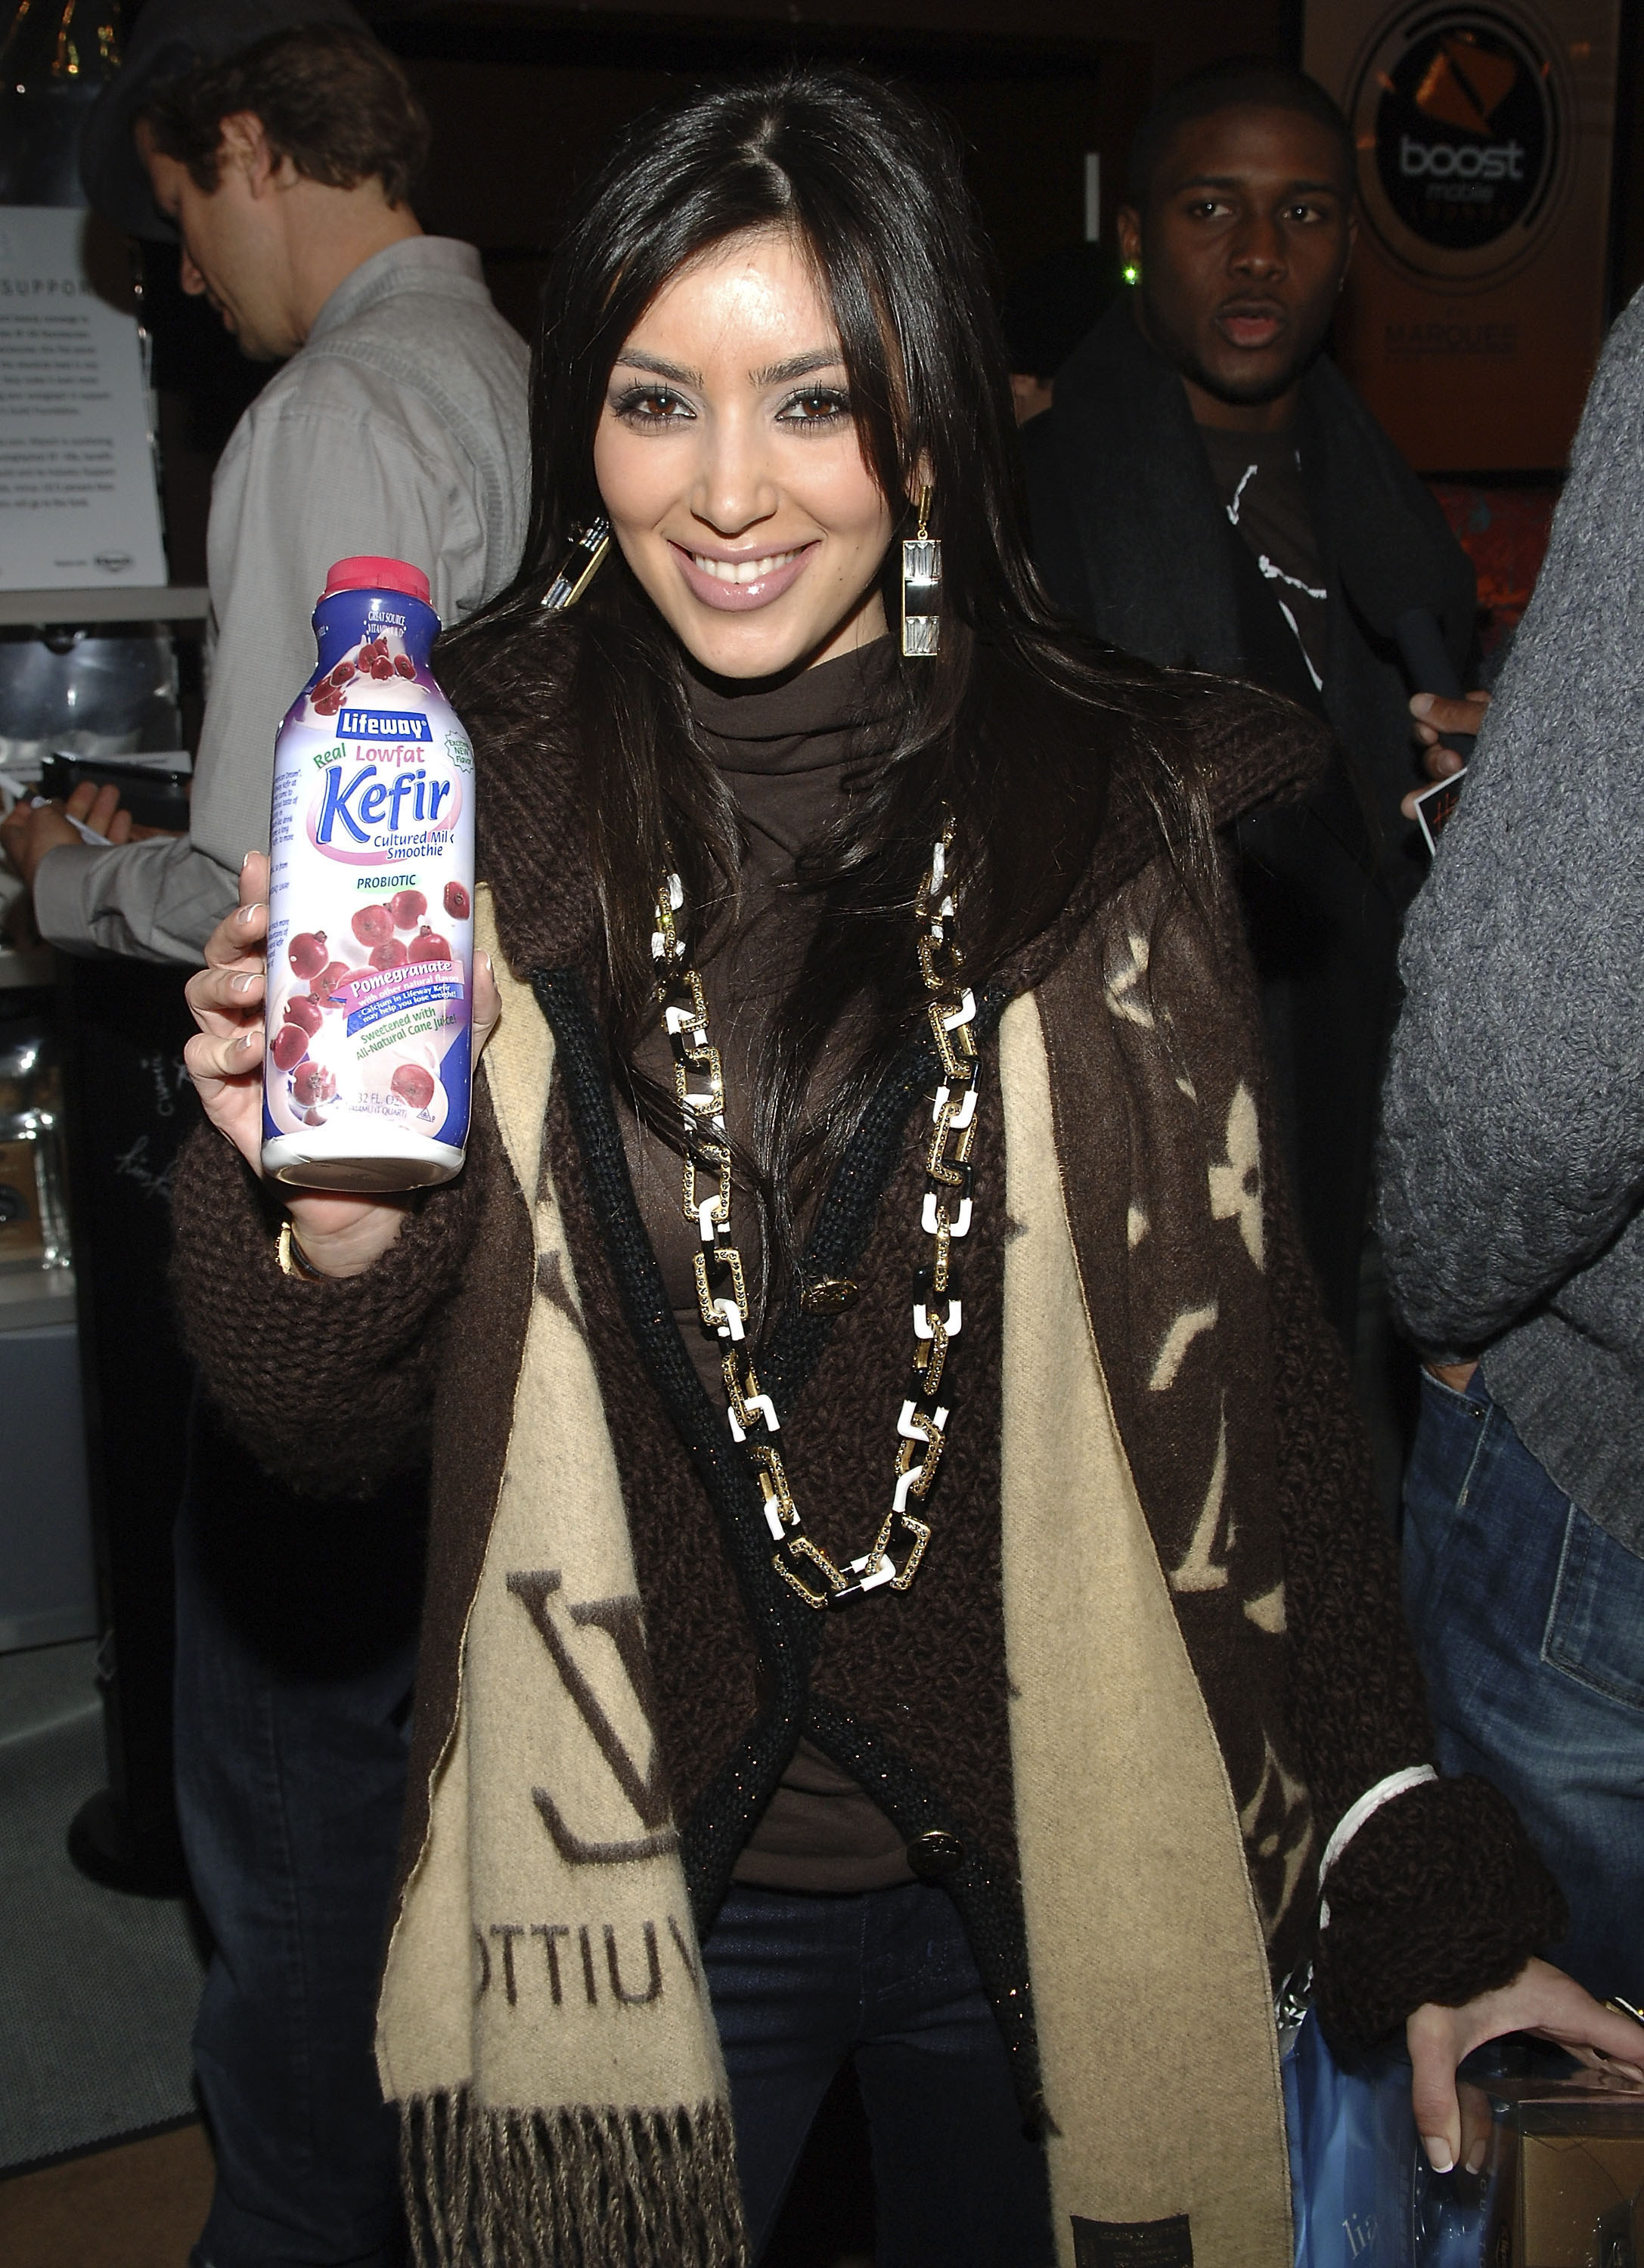 Kim wearing a long LV scarf while smiling and holding a bottle of Kefir